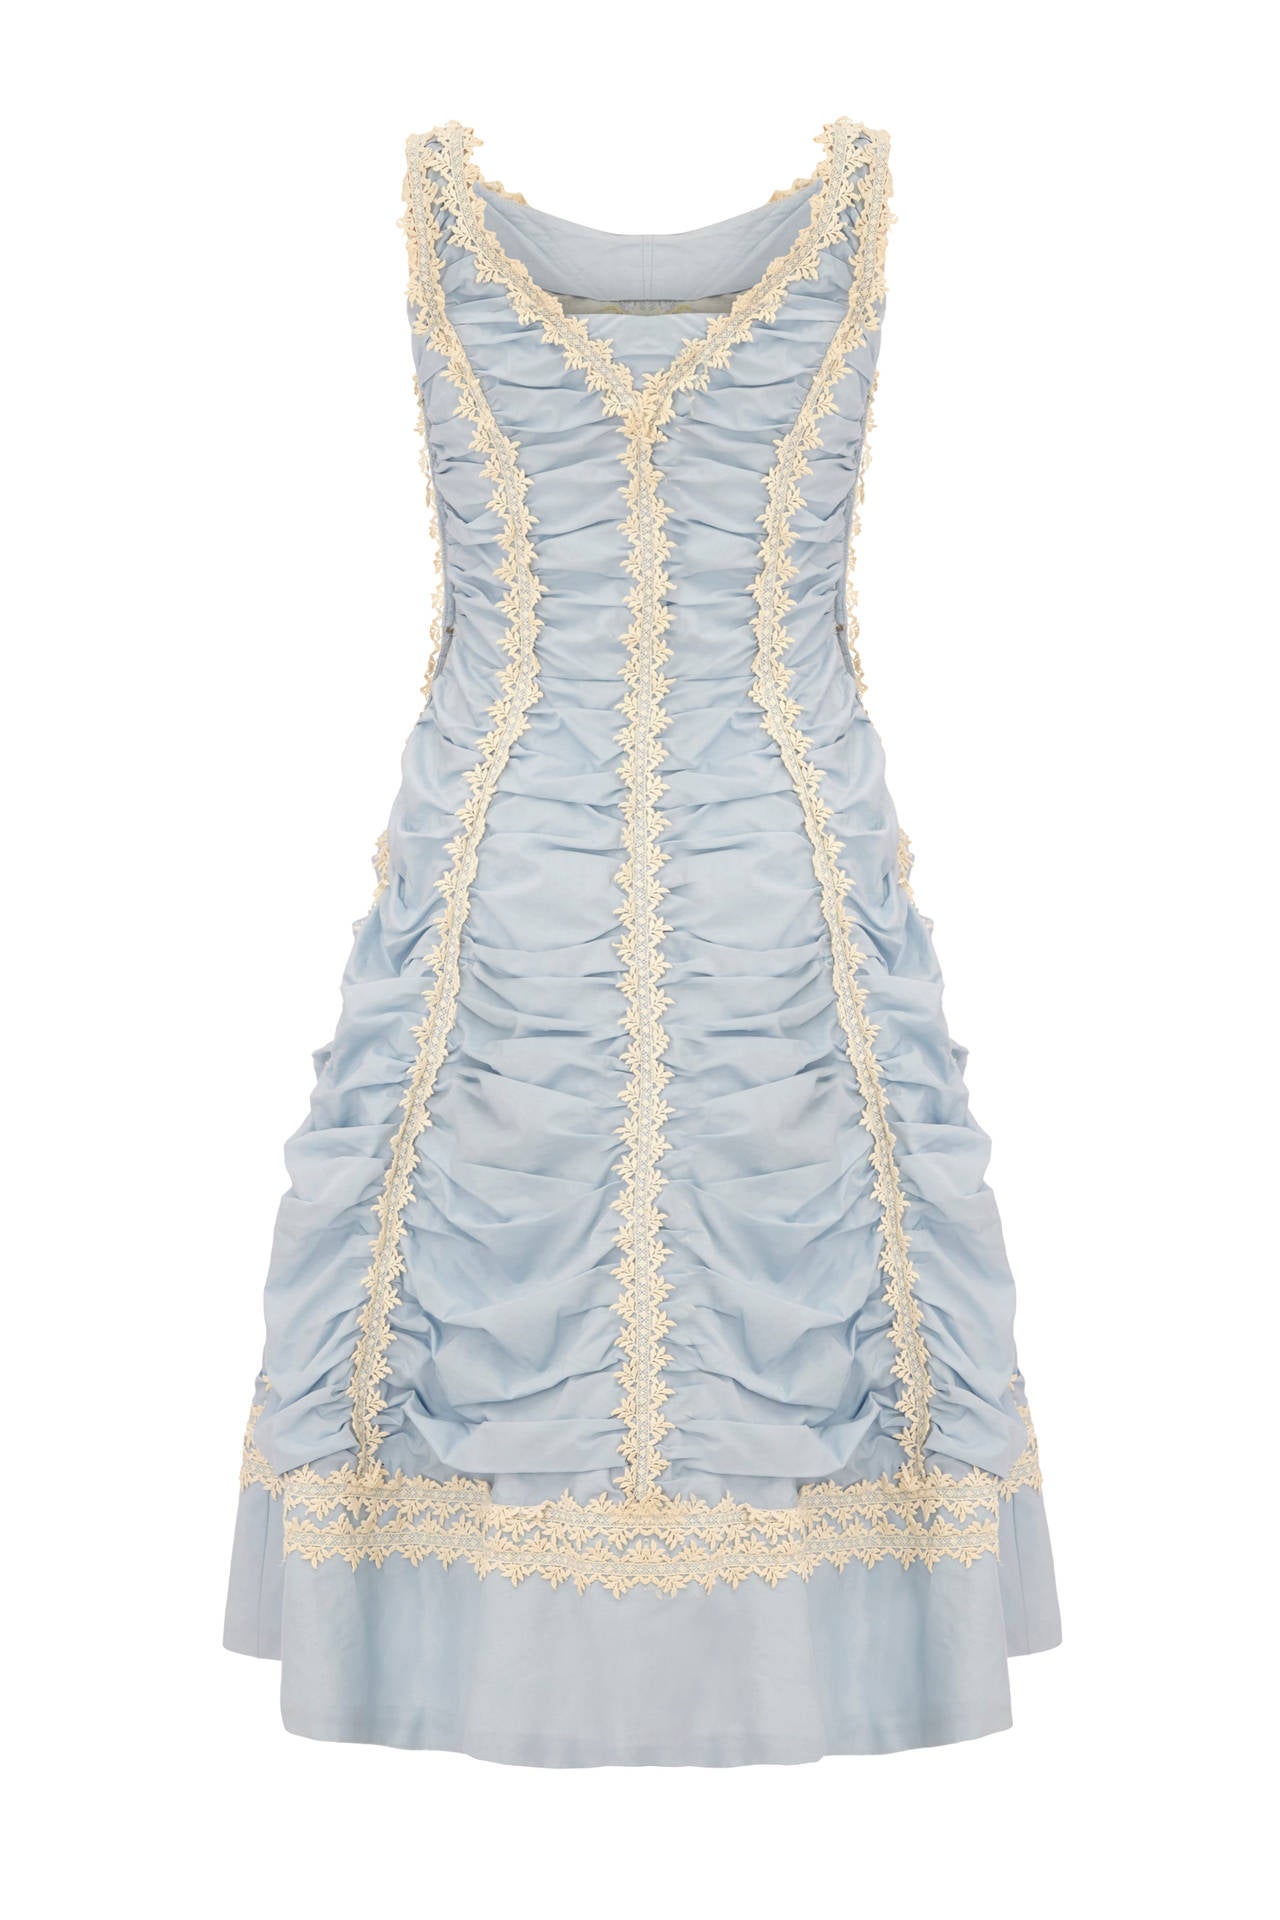 Very unusual pale blue cotton dress with heavy ruching throughout and white lace crochet applique forming panels.  This American piece is lined in pale blue organza, fastens at the side with a zip and has a net petticoat attached giving the skirt